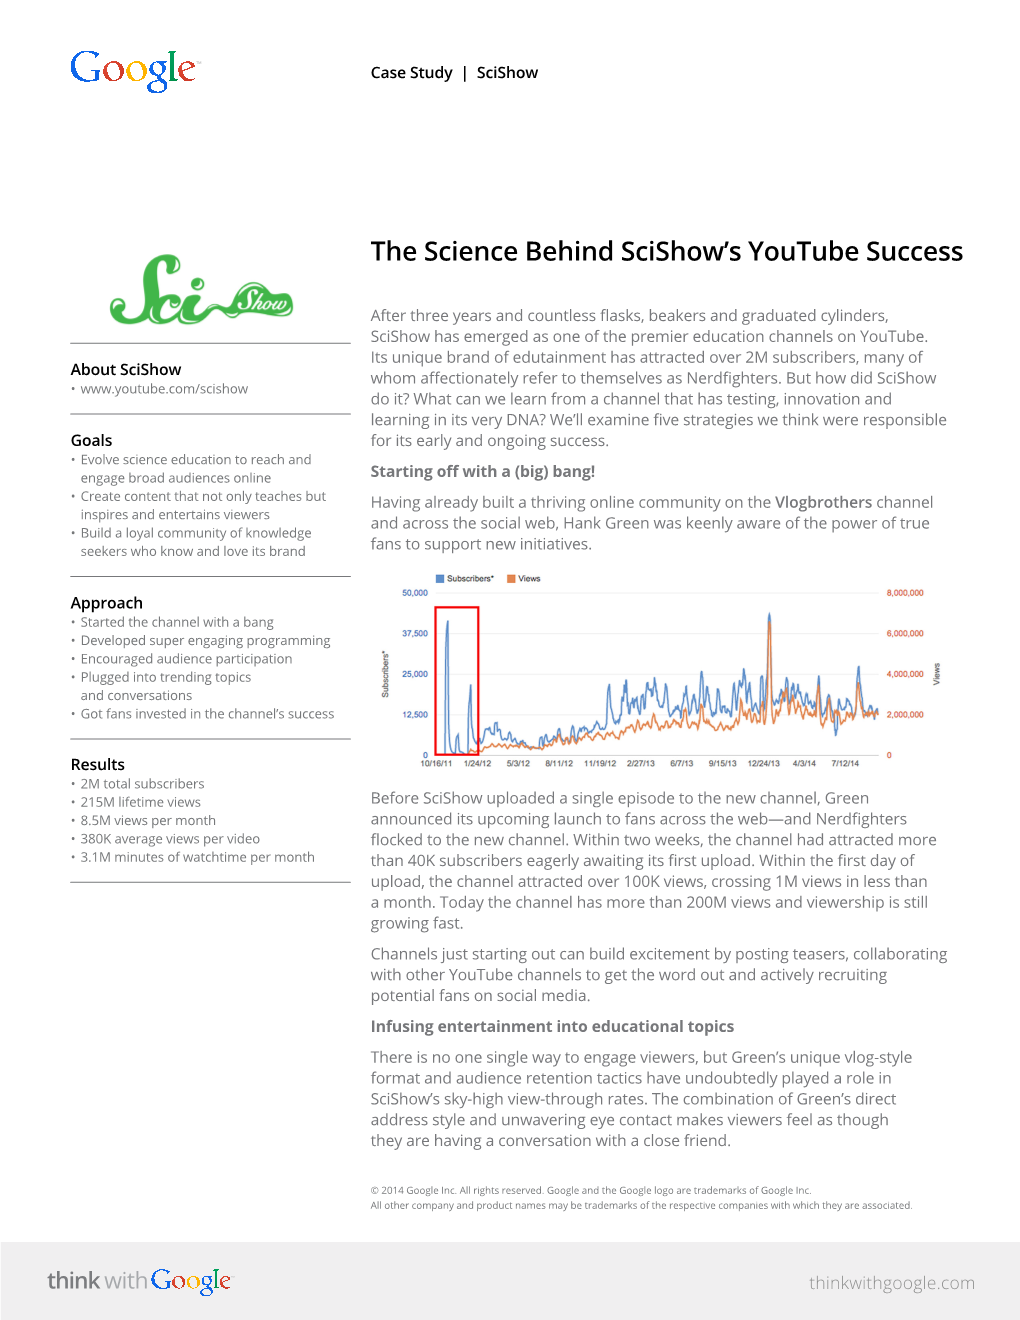 The Science Behind Scishow's Youtube Success